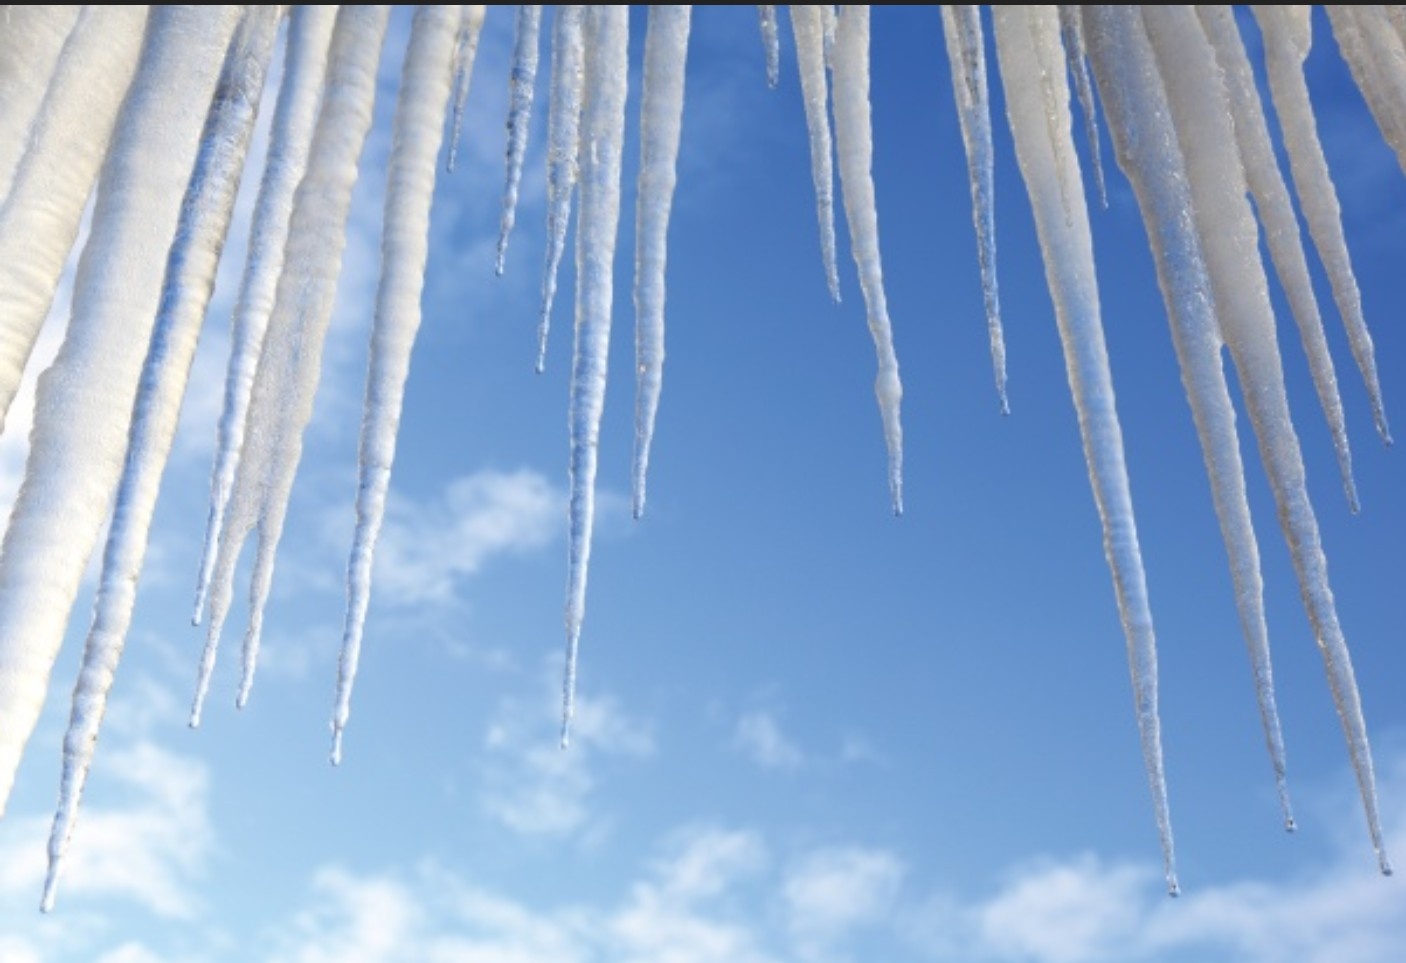 people who dodged bullets - icicles hanging